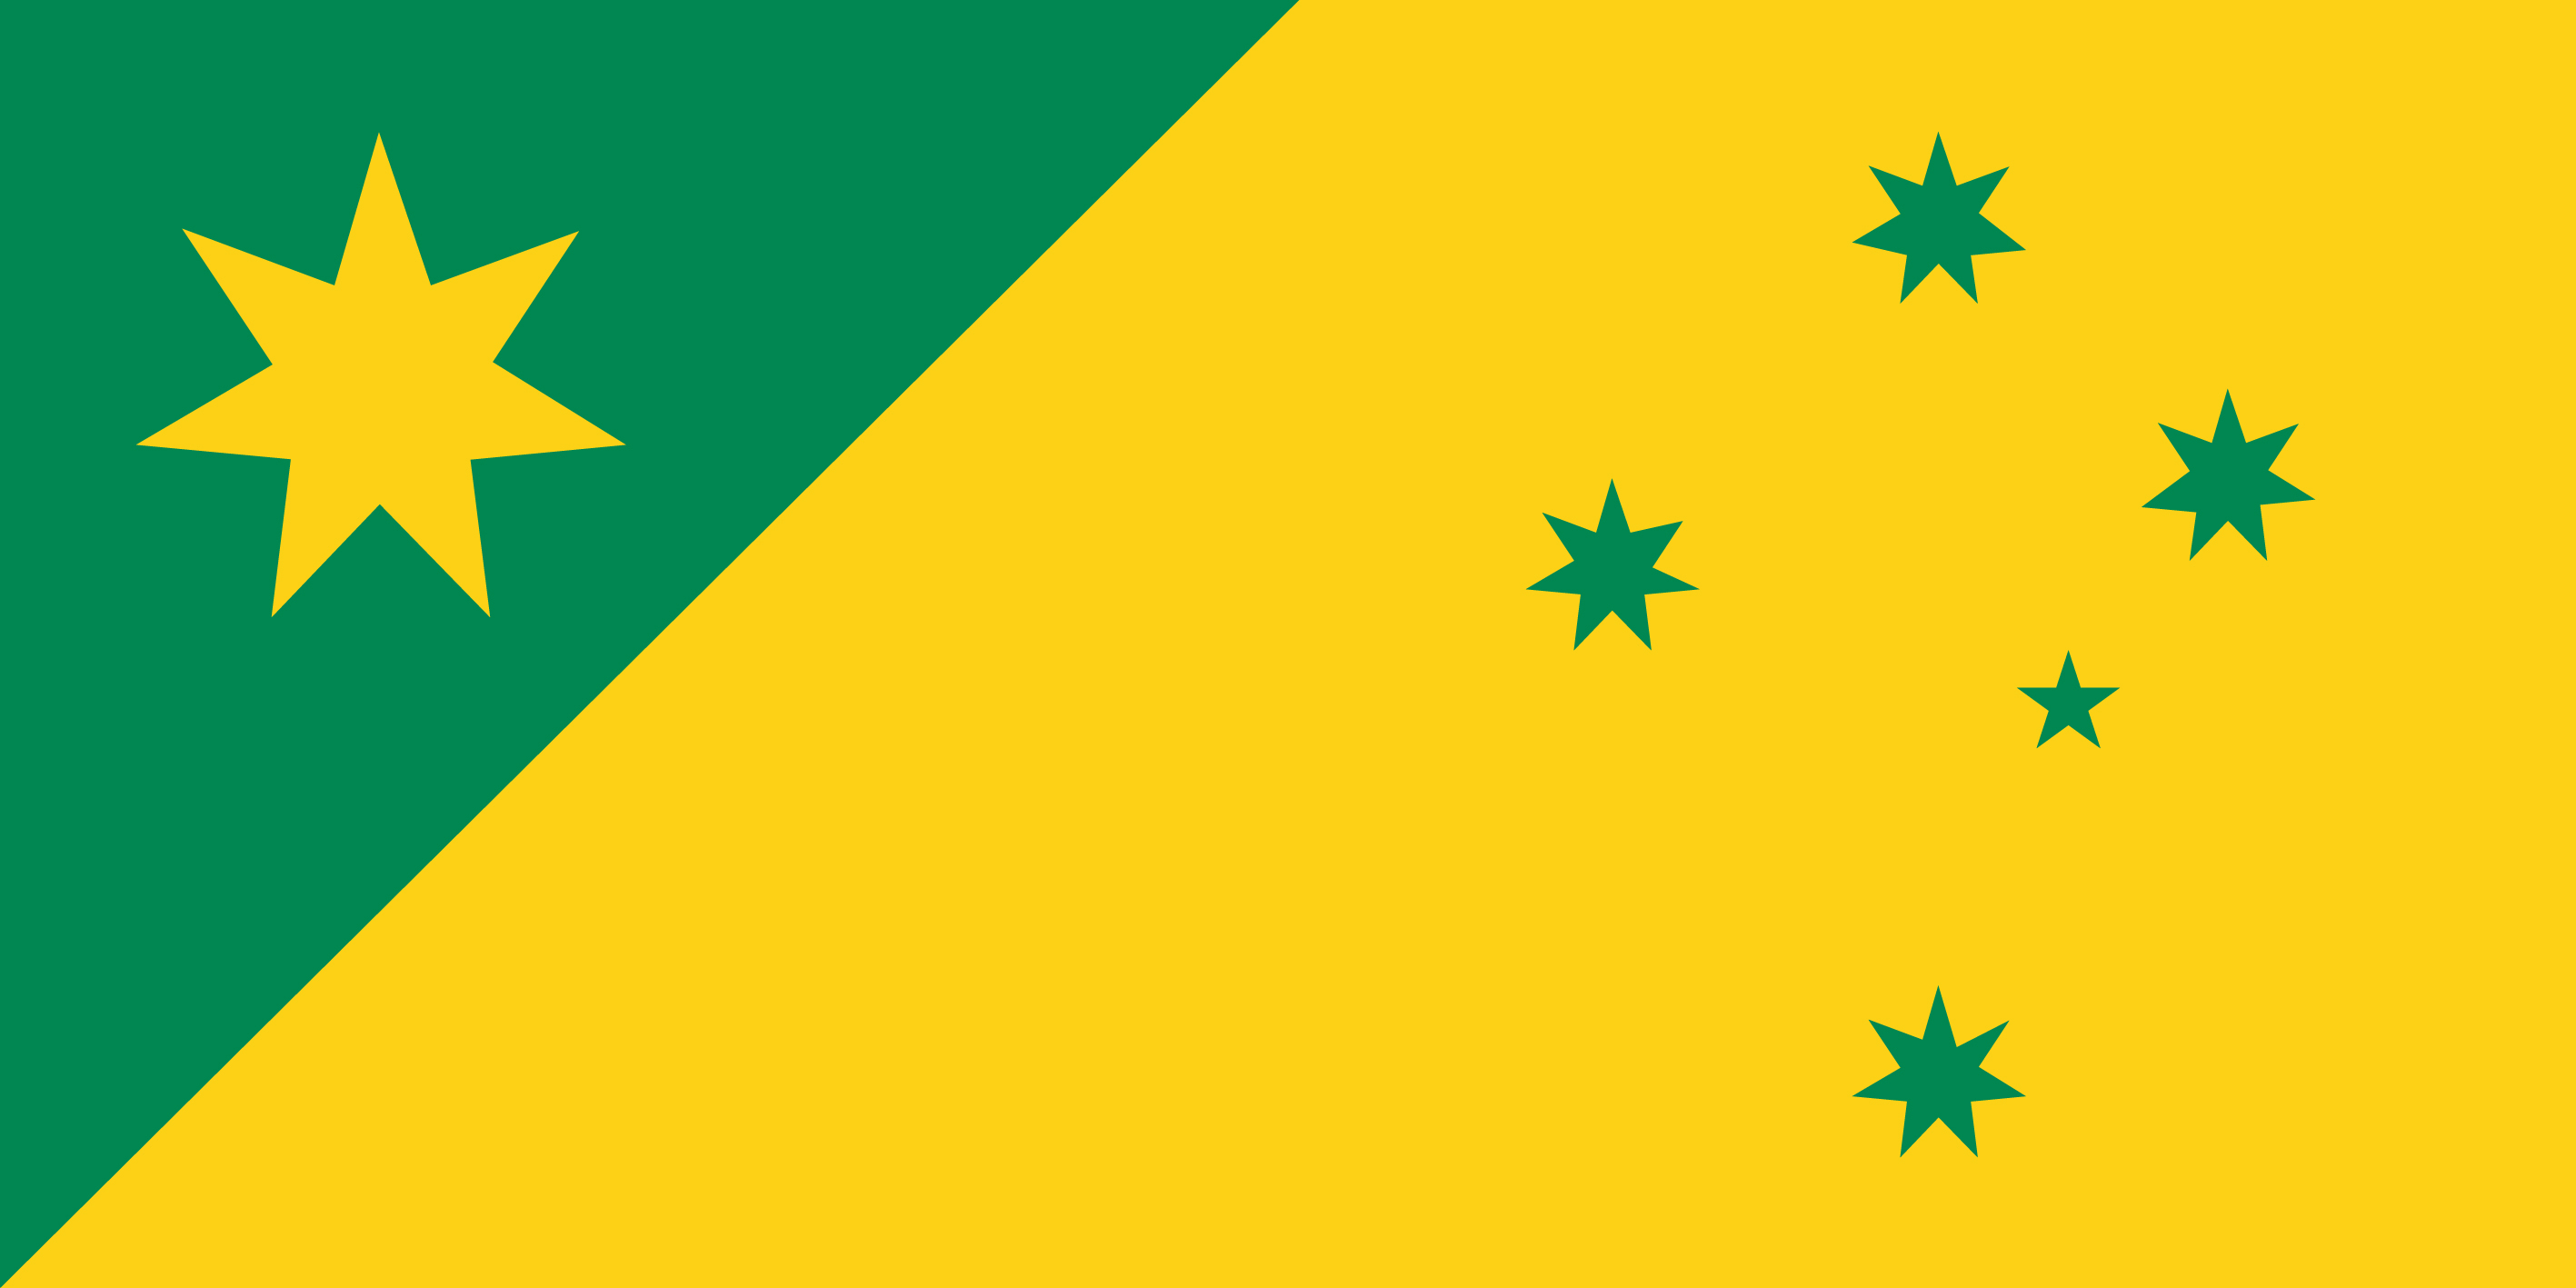 tin At adskille wafer File:Proposed Australian Flag - Traditional Green and Gold 2.jpg -  Wikimedia Commons